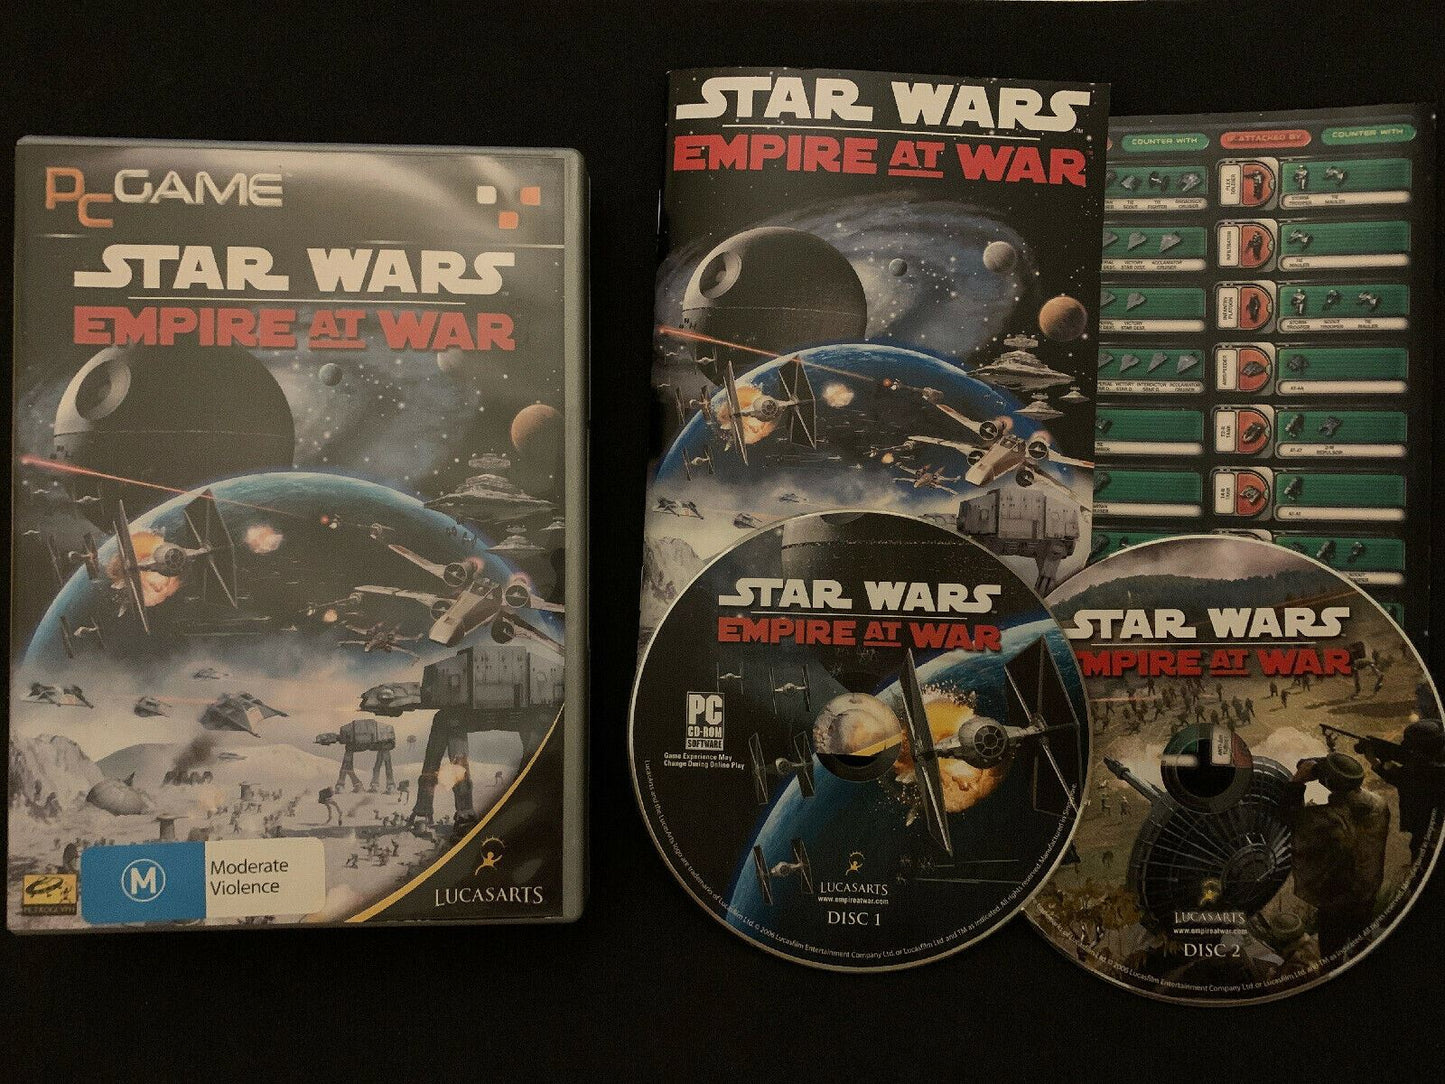 Star Wars: Empire at War for PC DVD Real-time Strategy Game